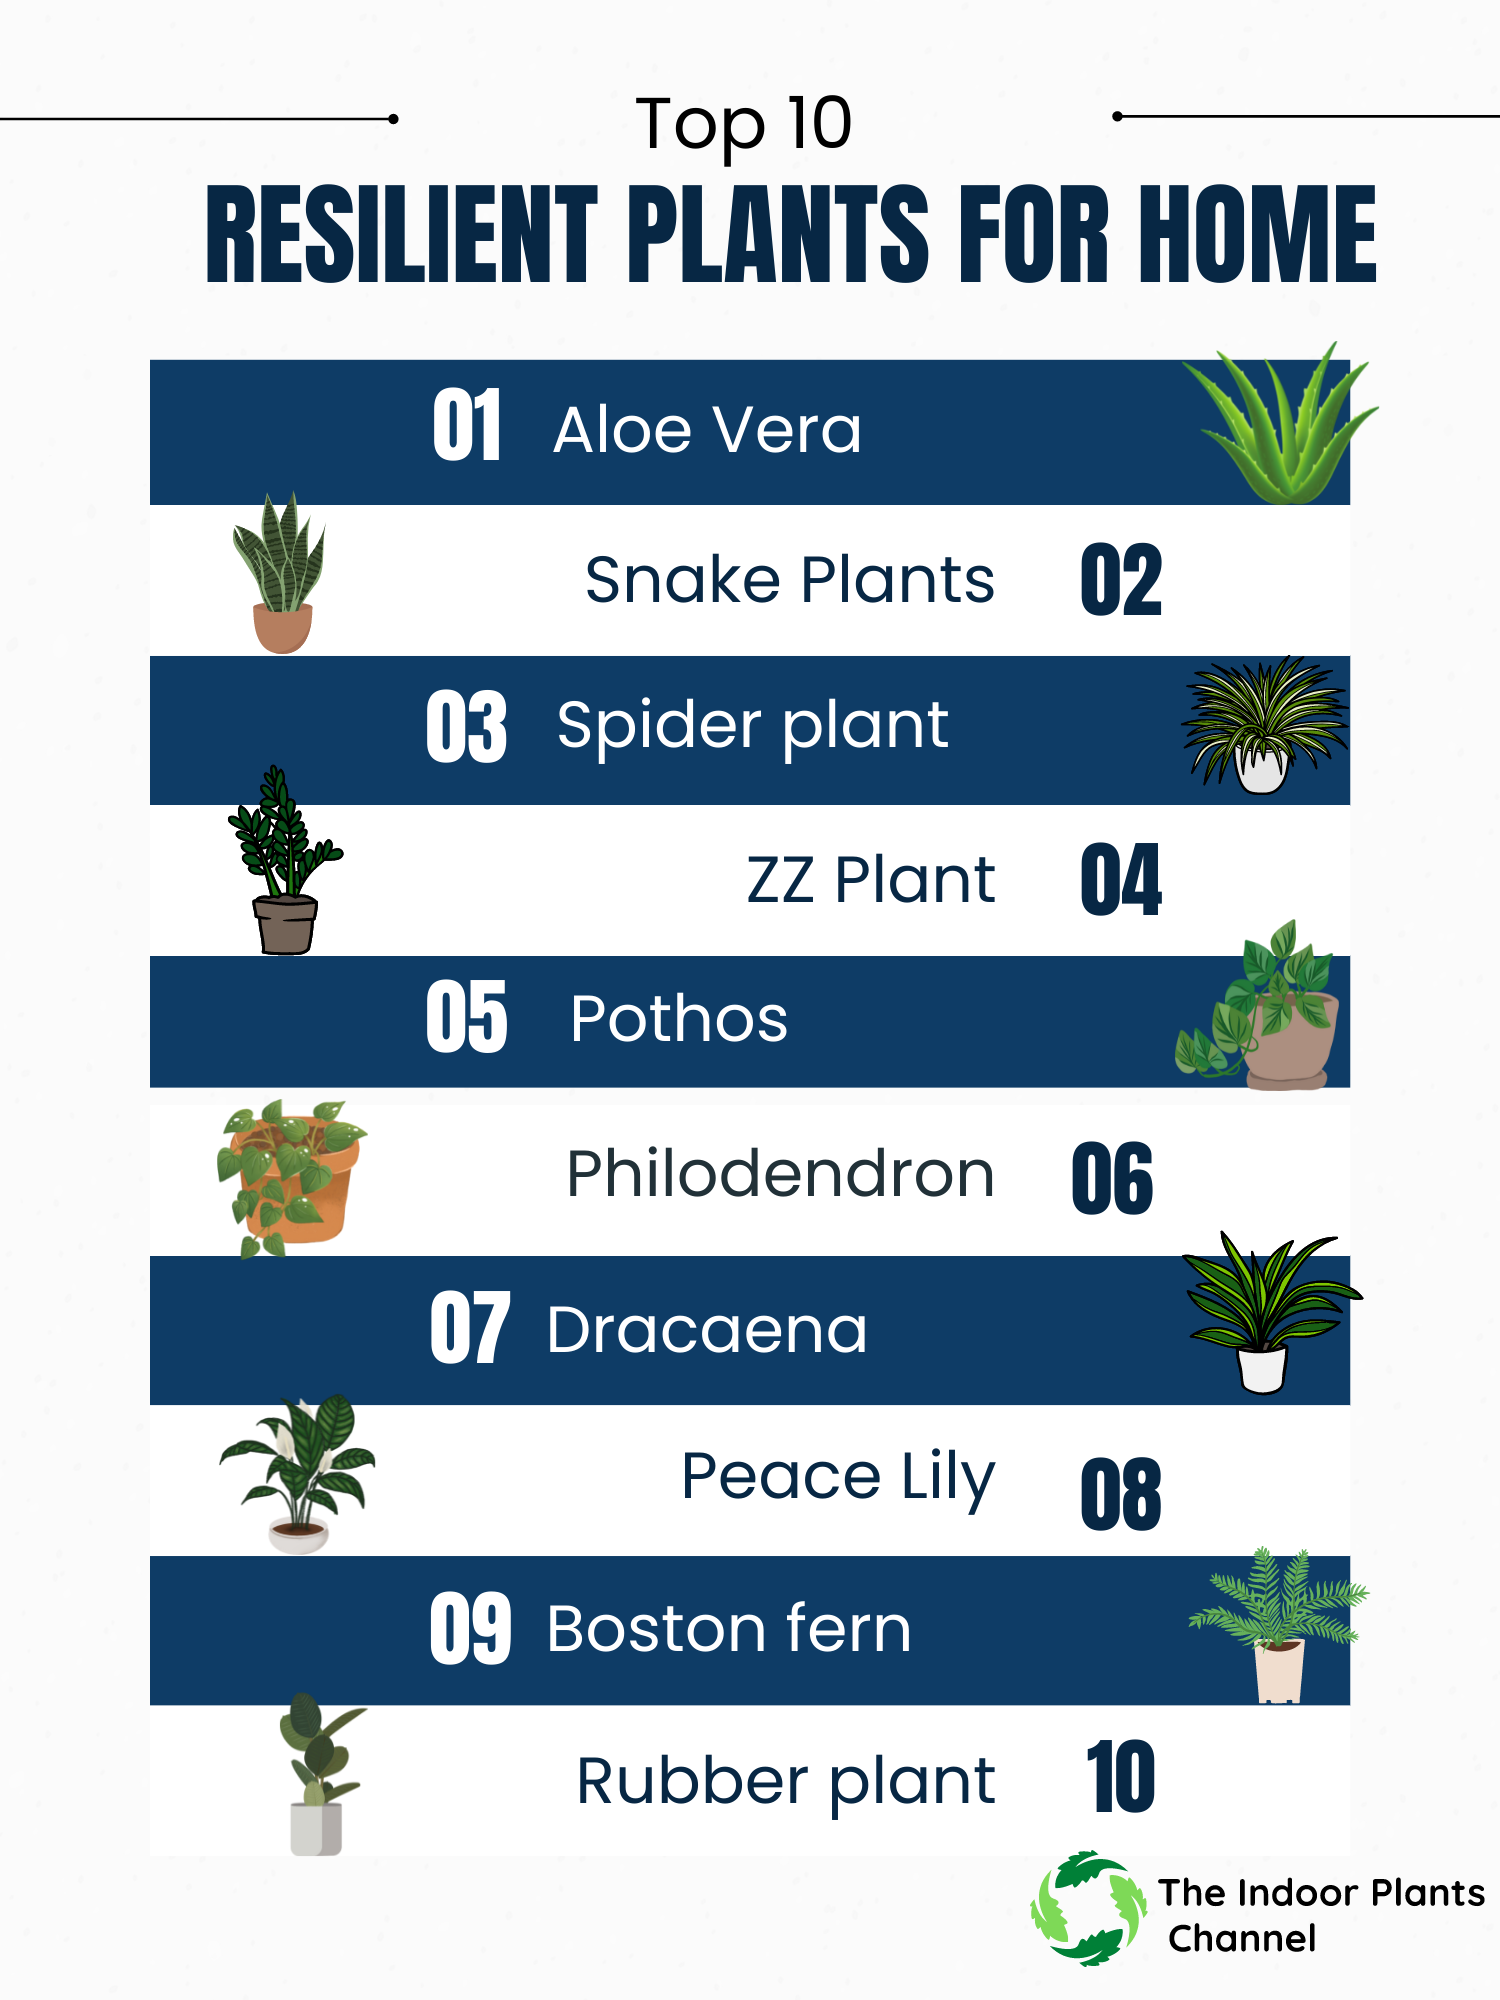 Top 10 Most Resilient Plants : The Ultimate Guide